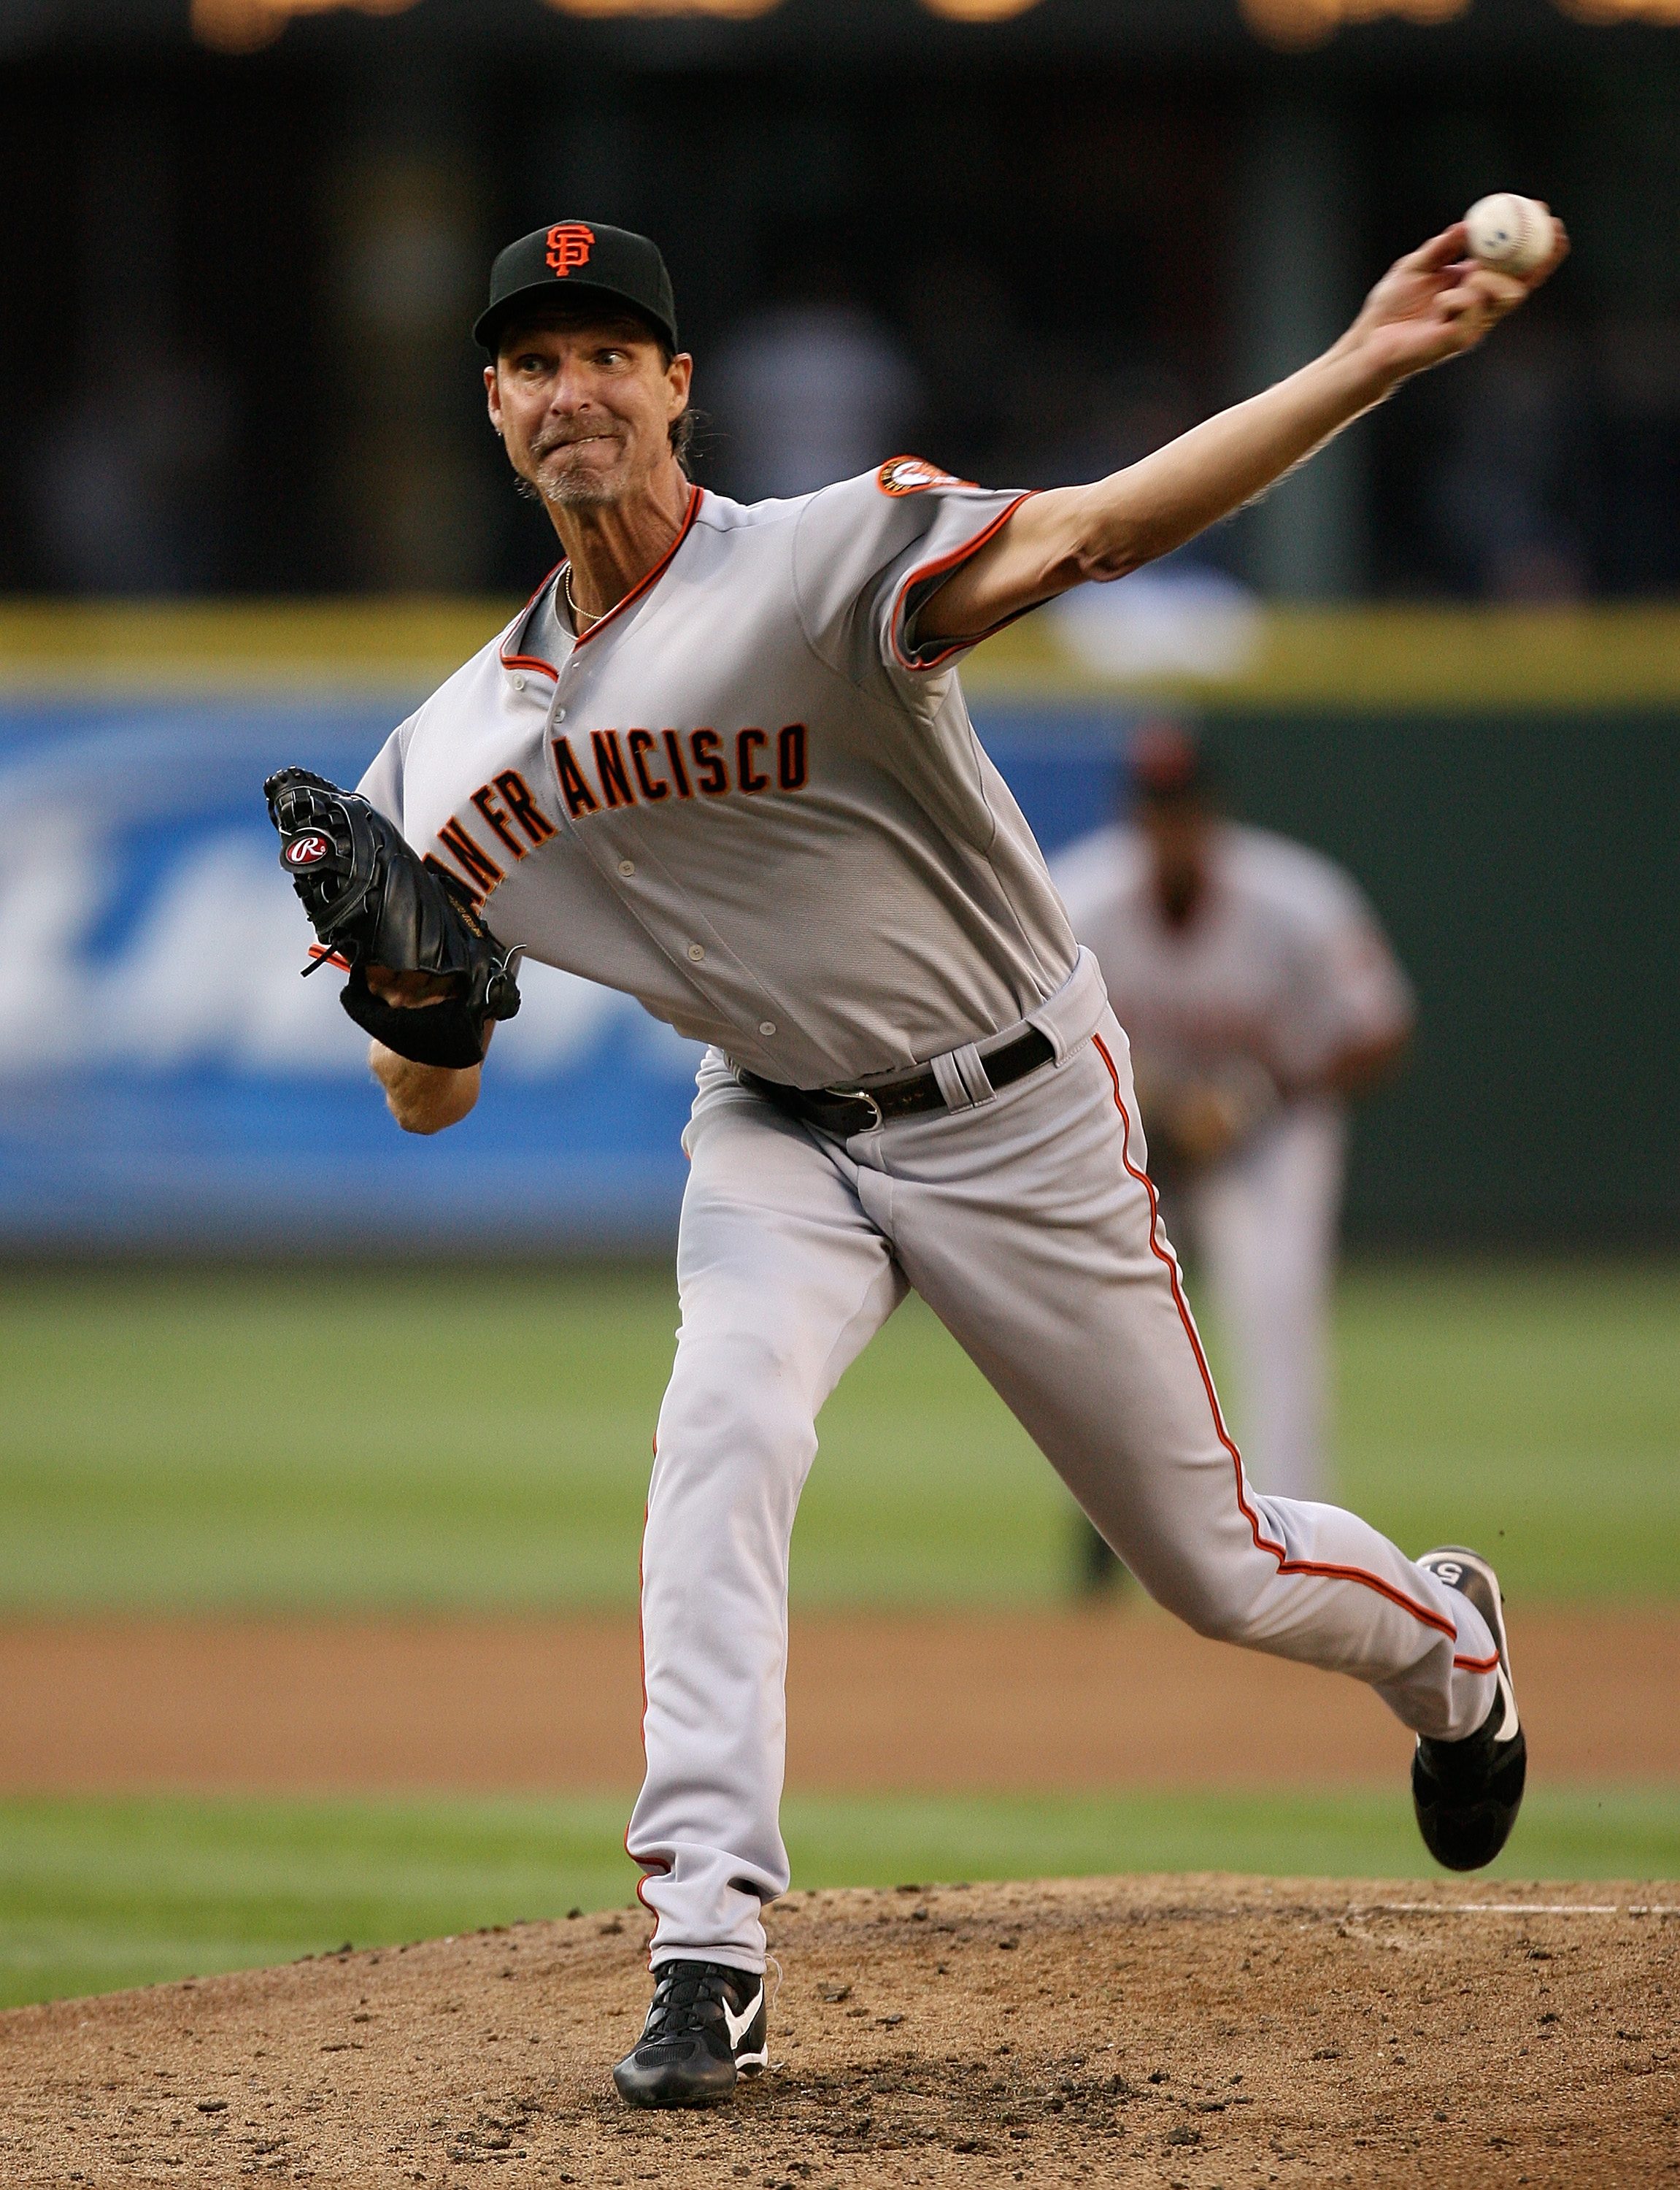 SEATTLE  - MAY 22:  Starter Randy Johnson #51 of the San Francisco Giants pitches against the Seattle Mariners on May 22, 2009 in Seattle, Washington. (Photo by Otto Greule Jr/Getty Images)